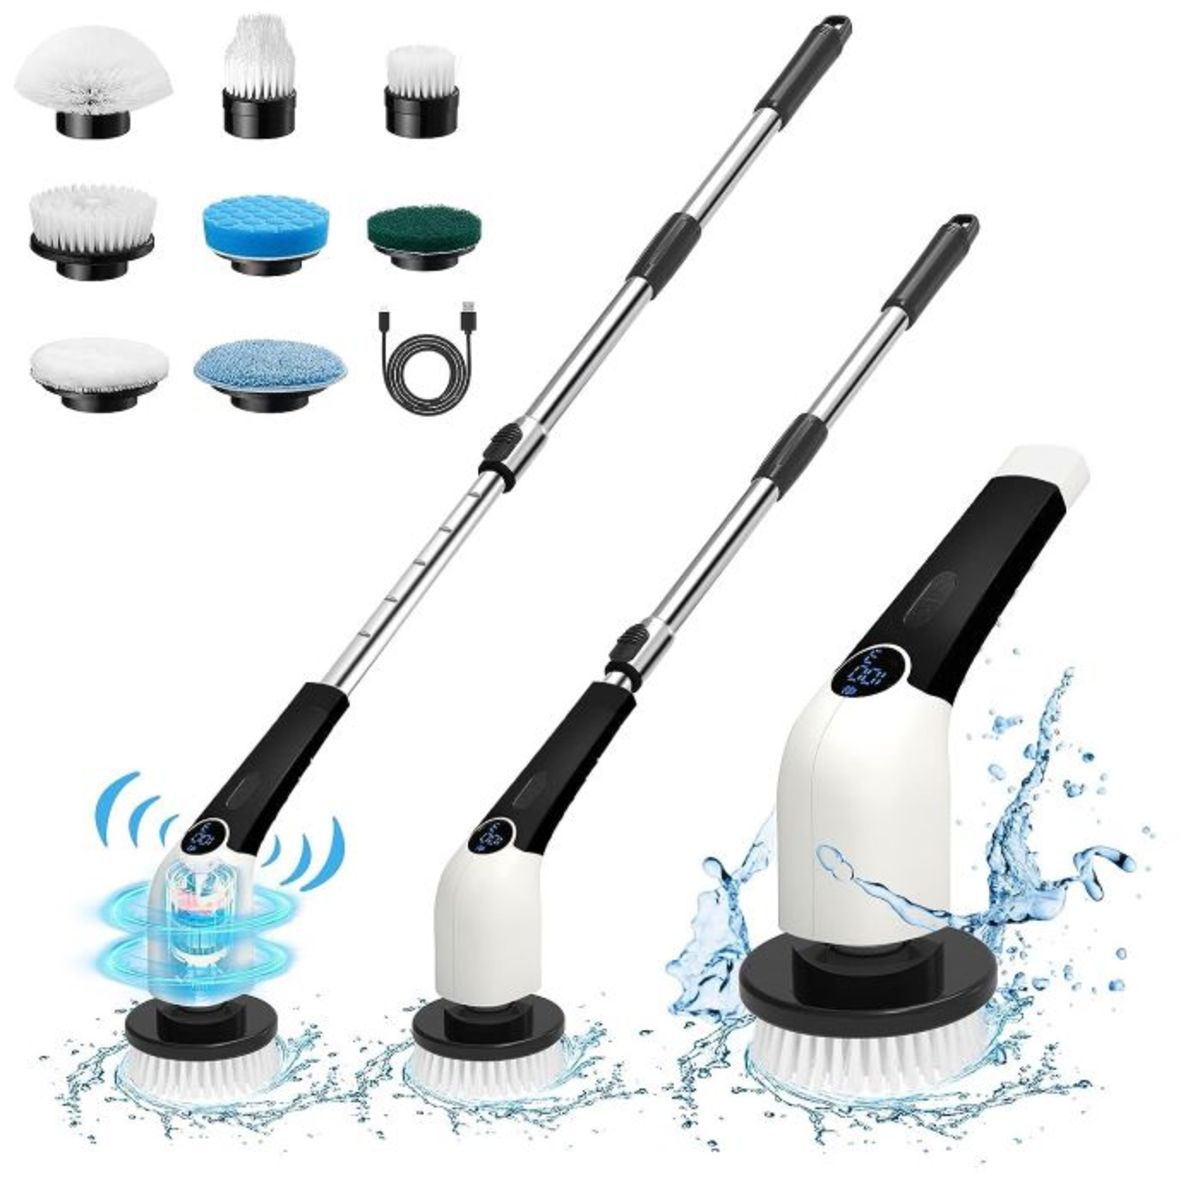 Versatile electric bathroom scrubber for a Perfect Home 